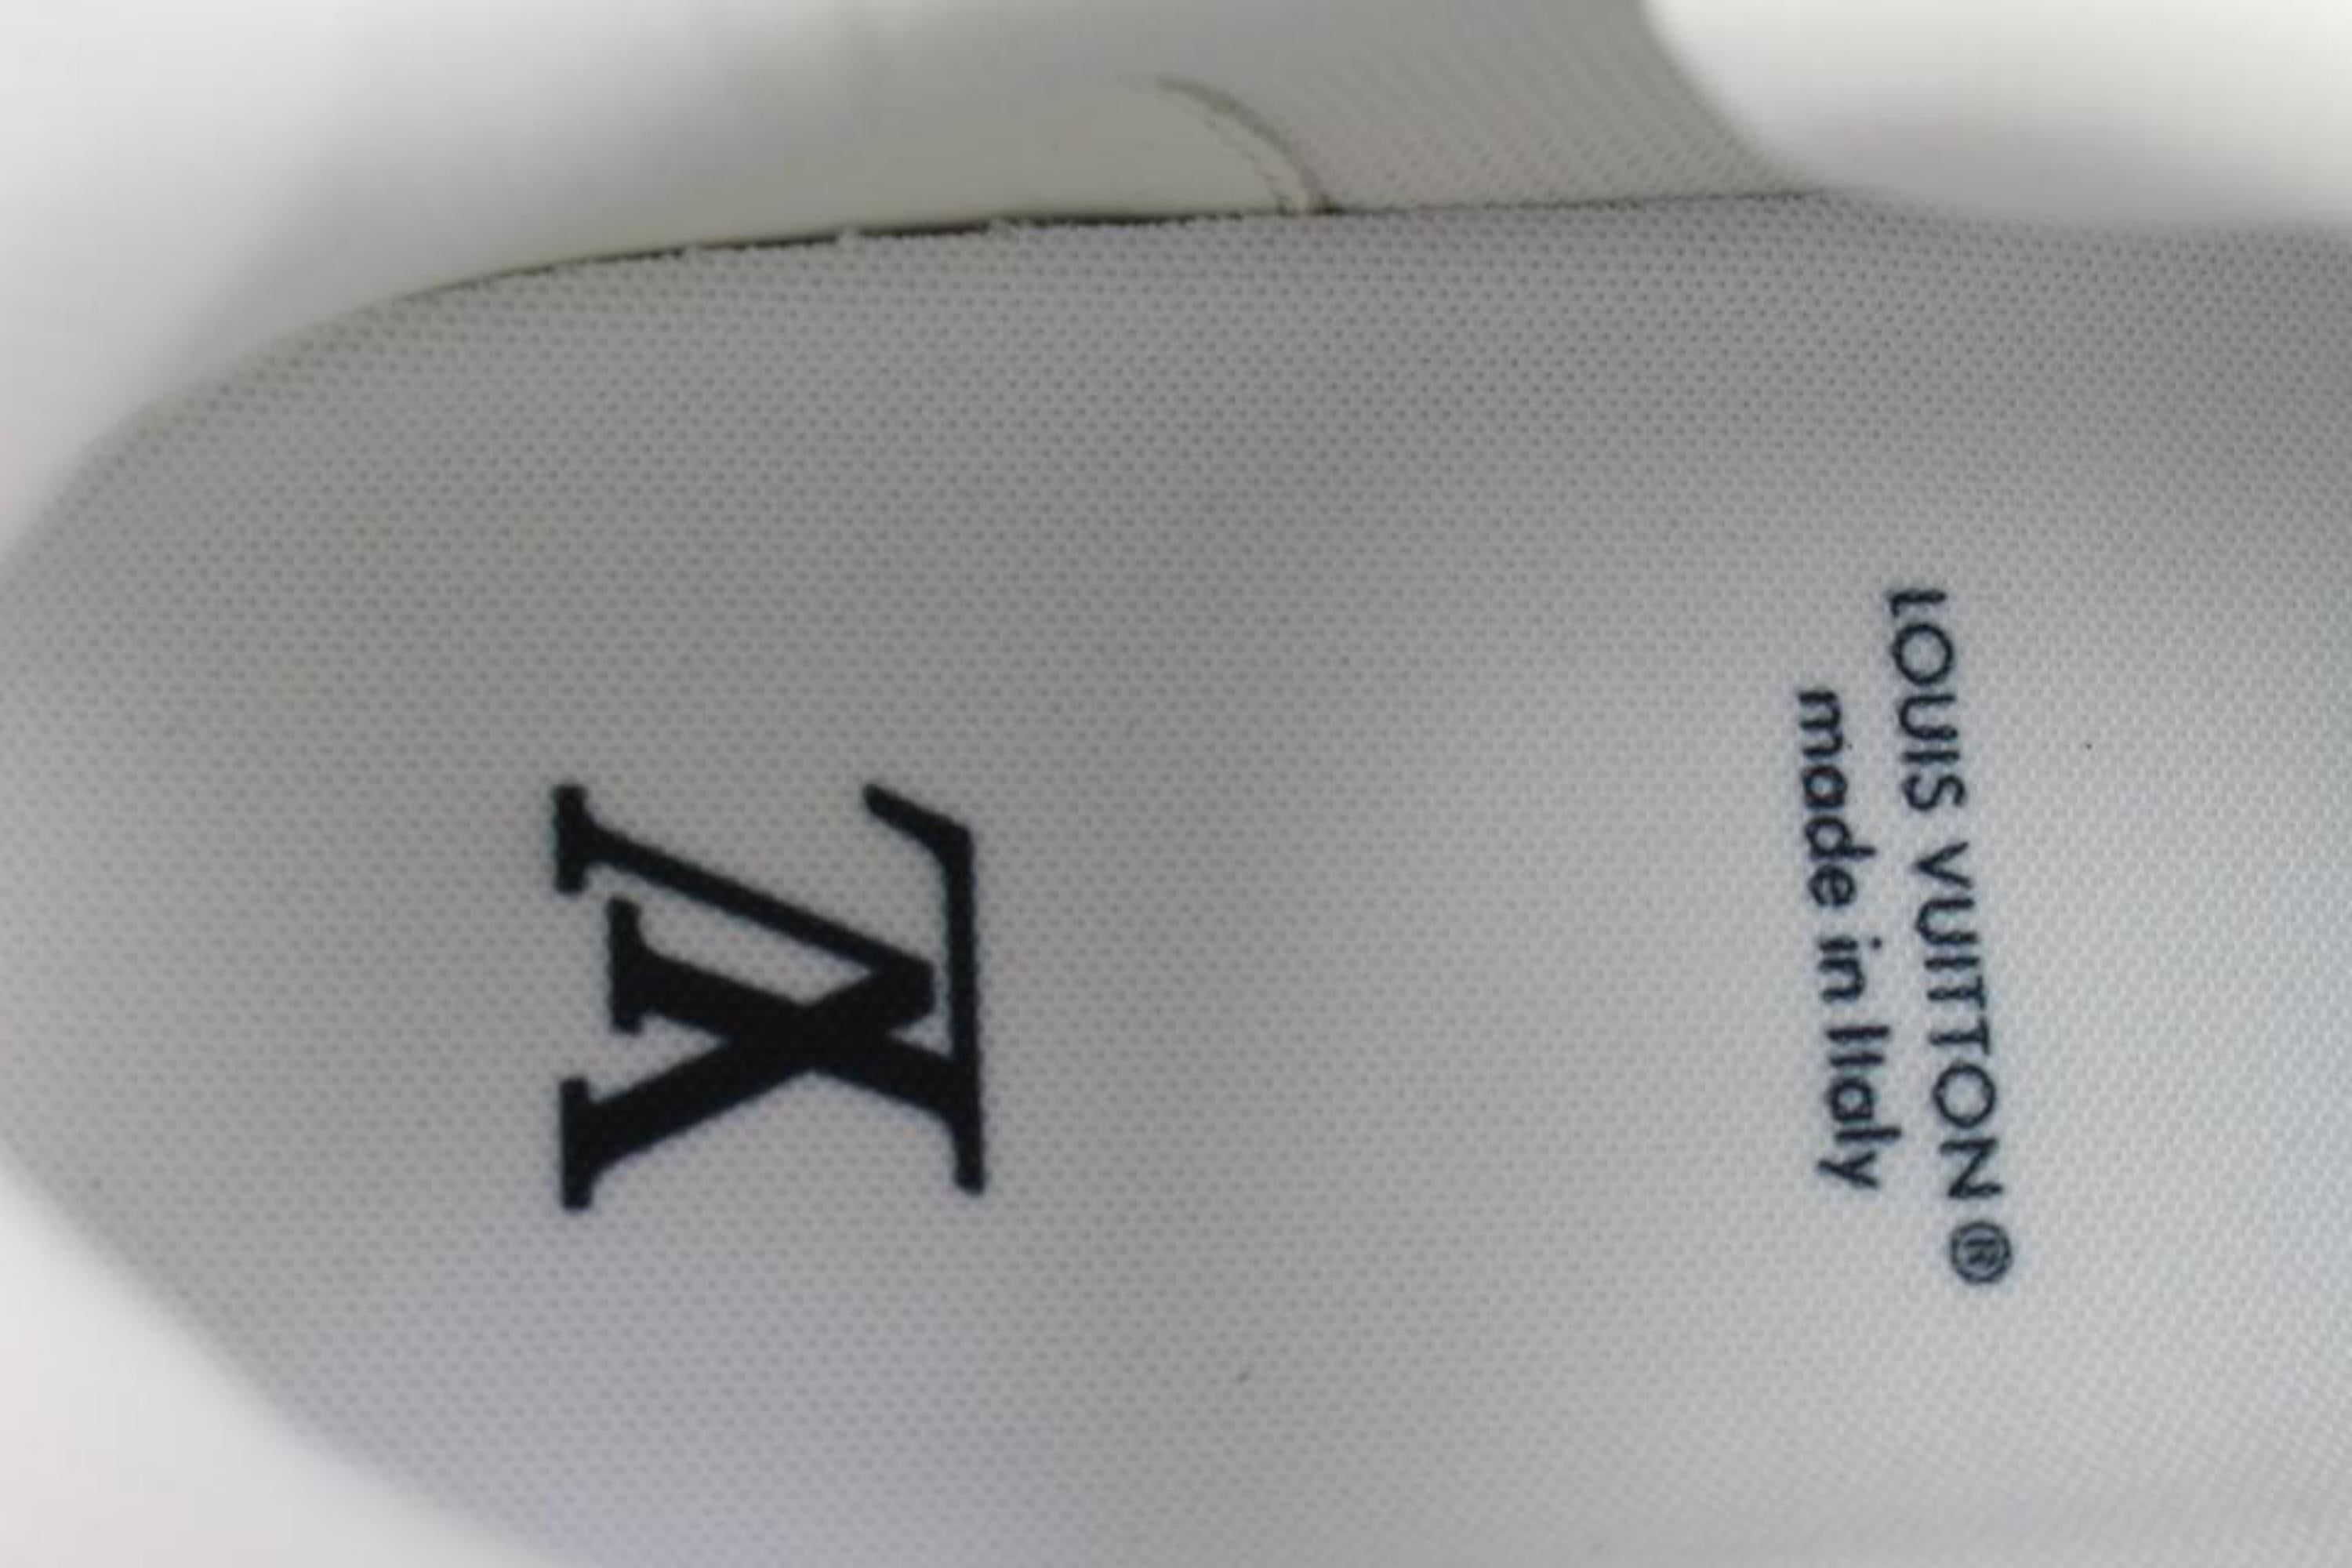 lv trainer size tag